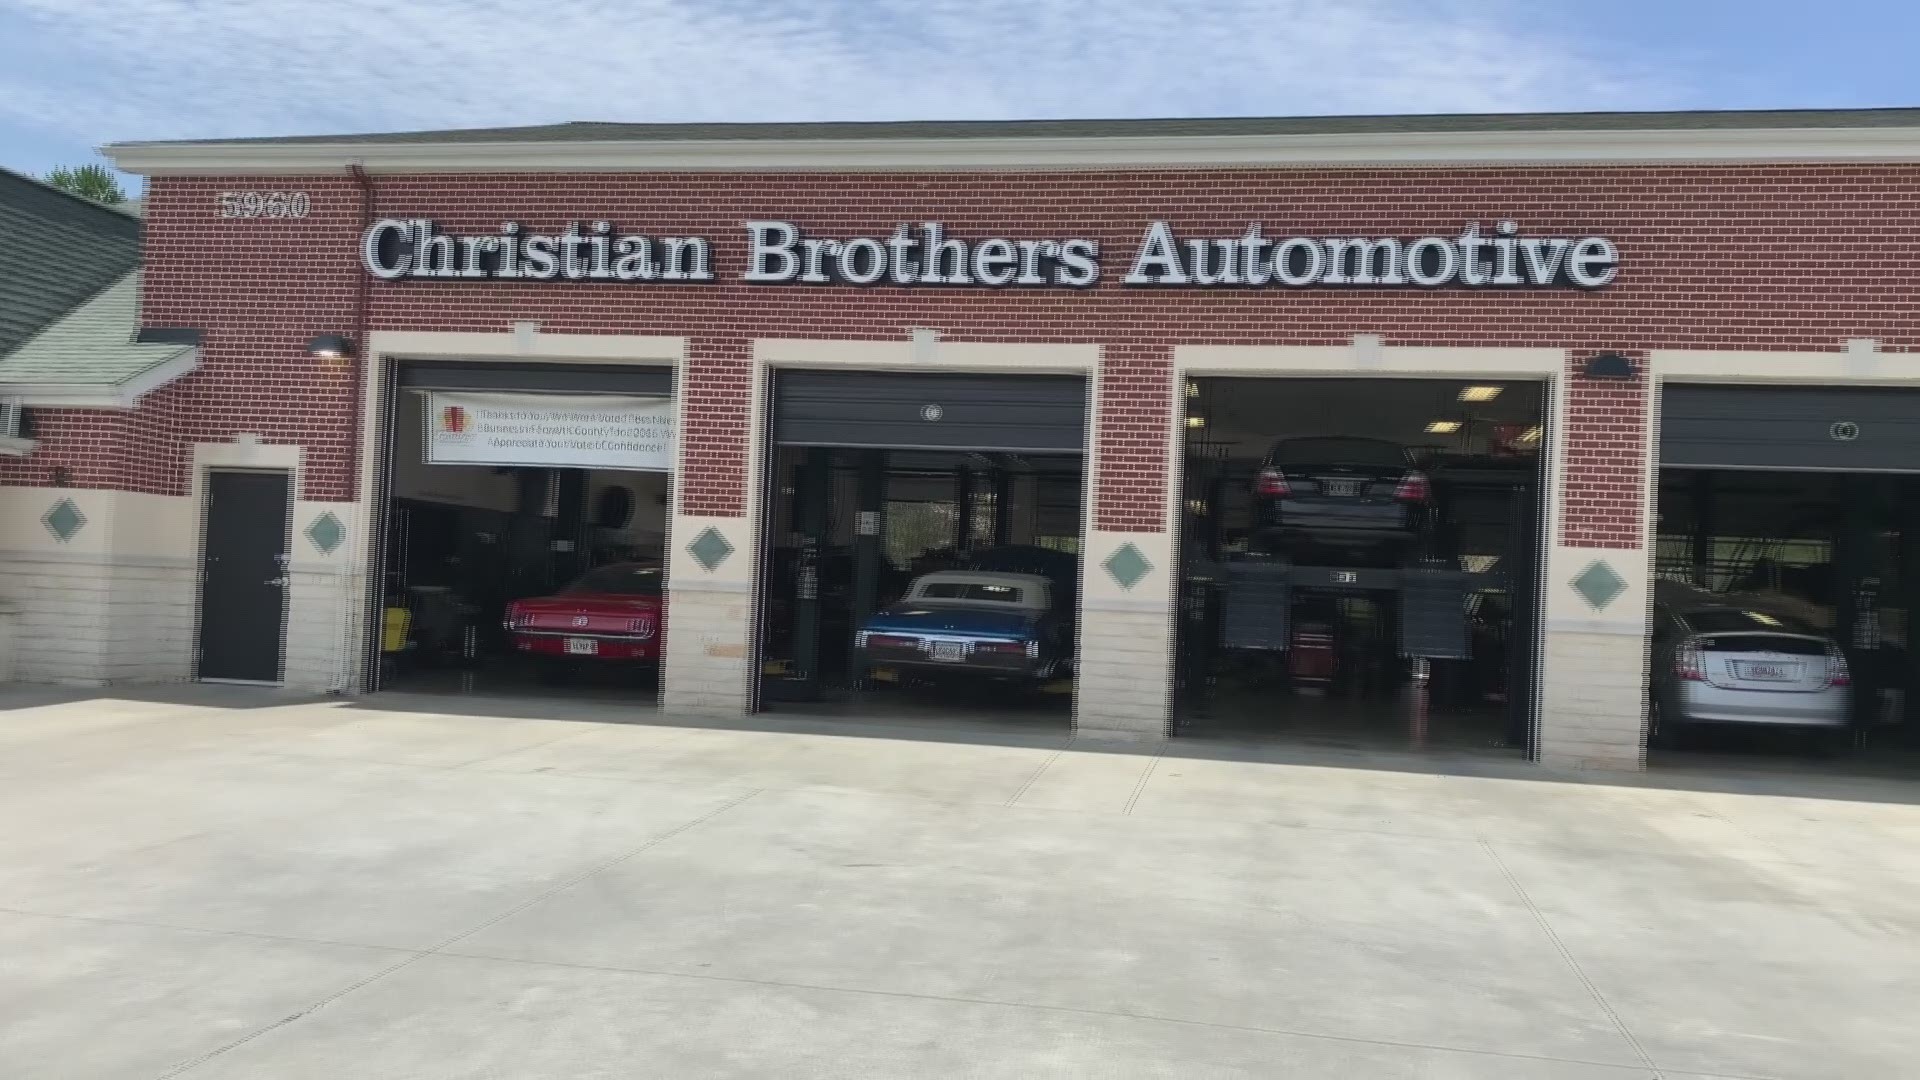 Christian Brothers Automotive in Cumming has made a few changes, to keep all the workers employed.